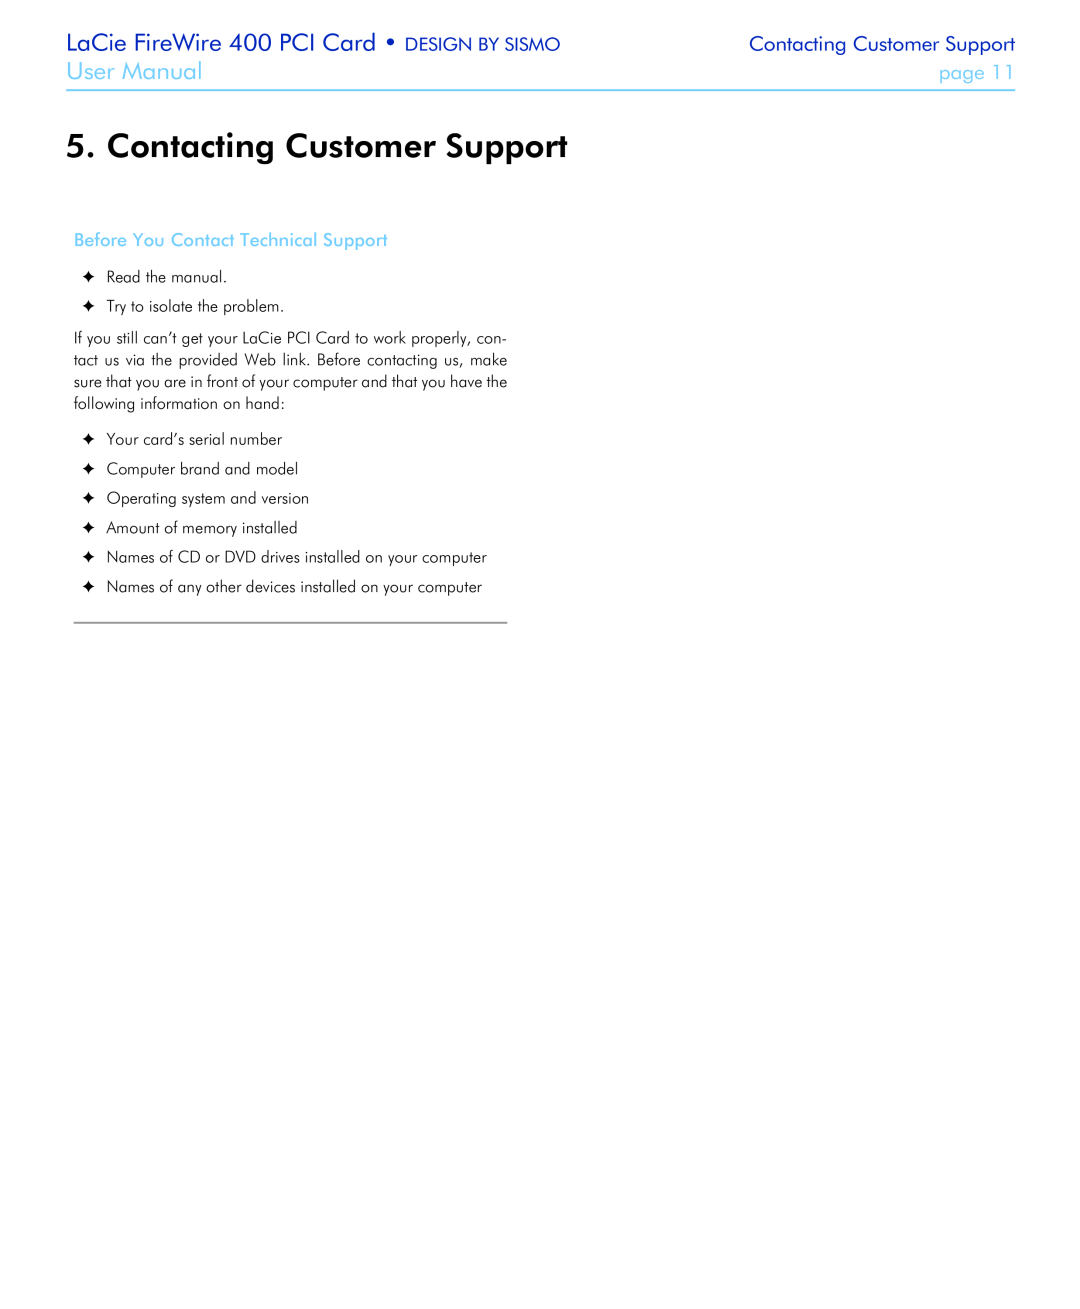 LaCie Contacting Customer Support, Before You Contact Technical Support, LaCie FireWire 400 PCI Card DESIGN BY SISMO 